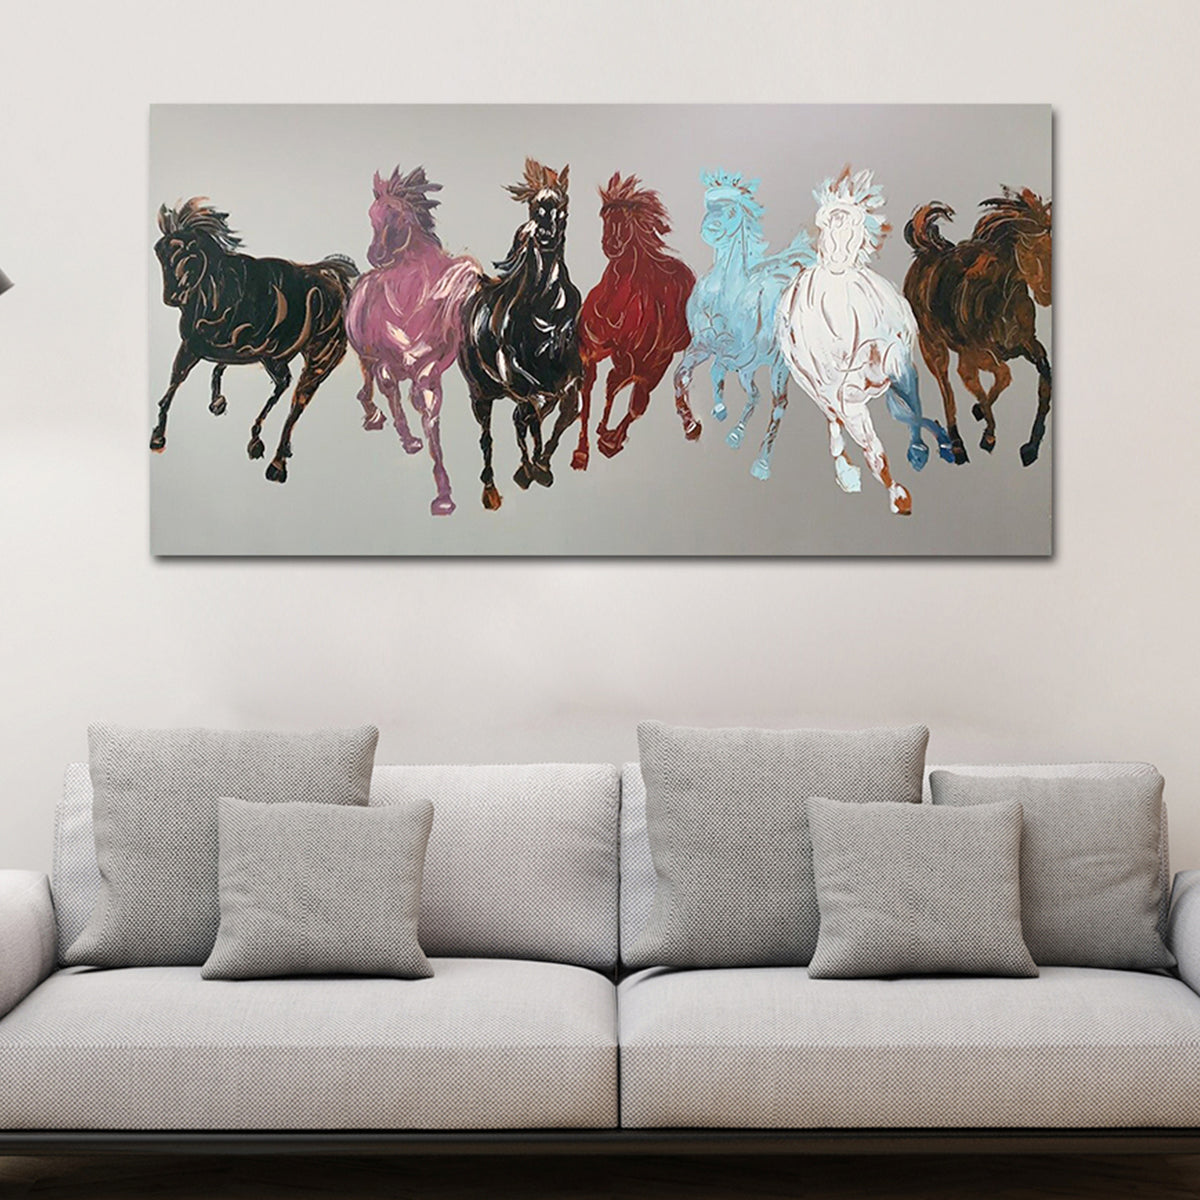 Buy Online Seven Running Horses Hand Painted Wall Painting Dekor Company